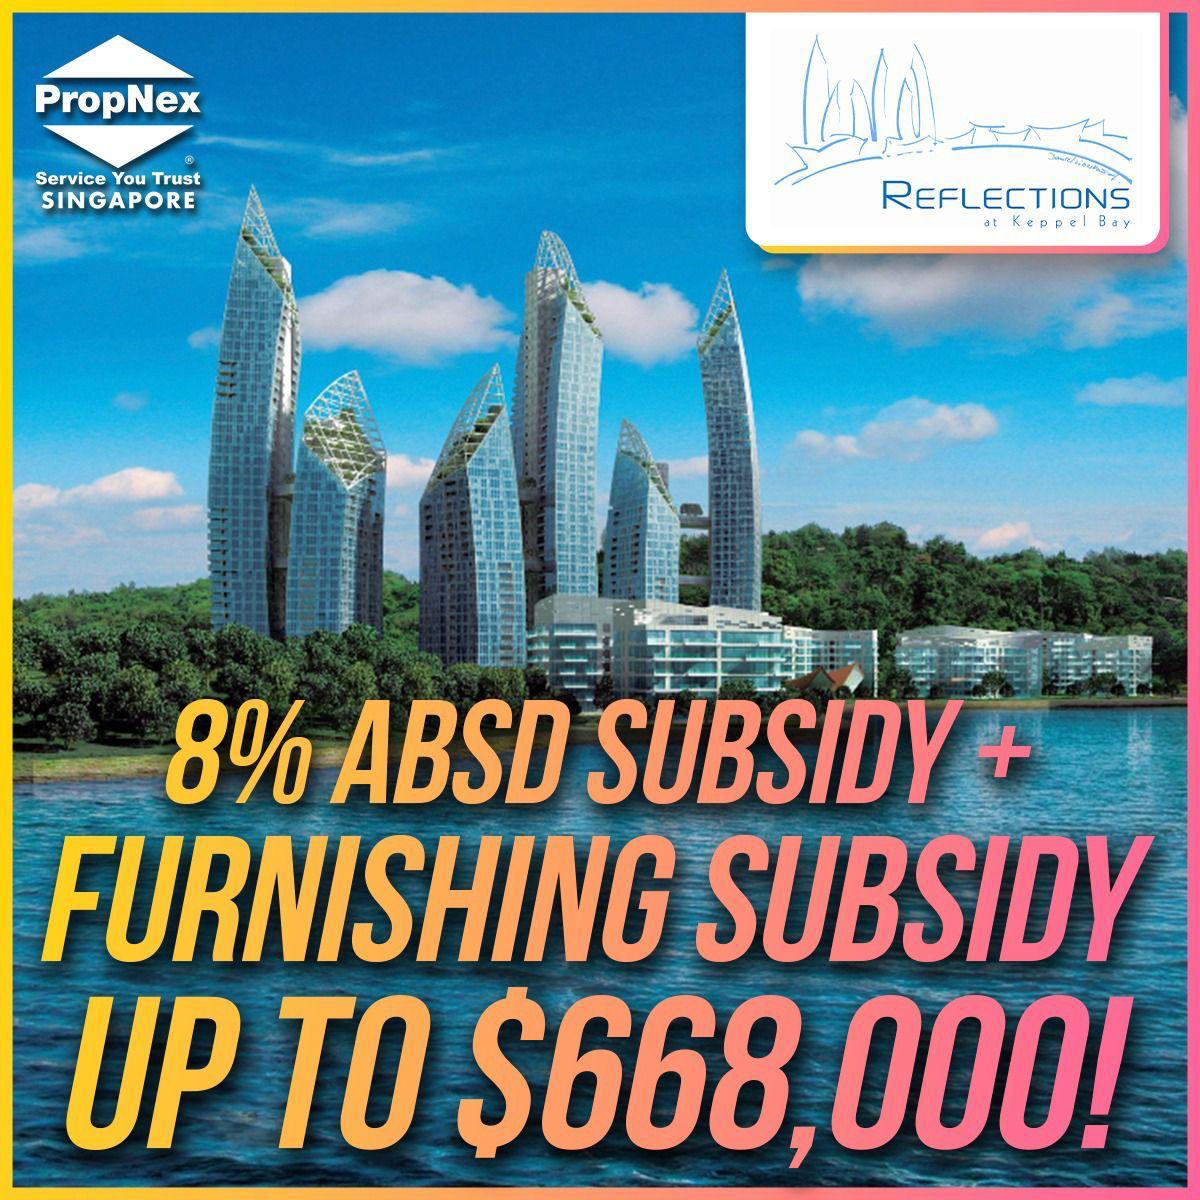 Reflections At Keppel Bay 8 ABSD Furnishing Subsidy Up to 668000